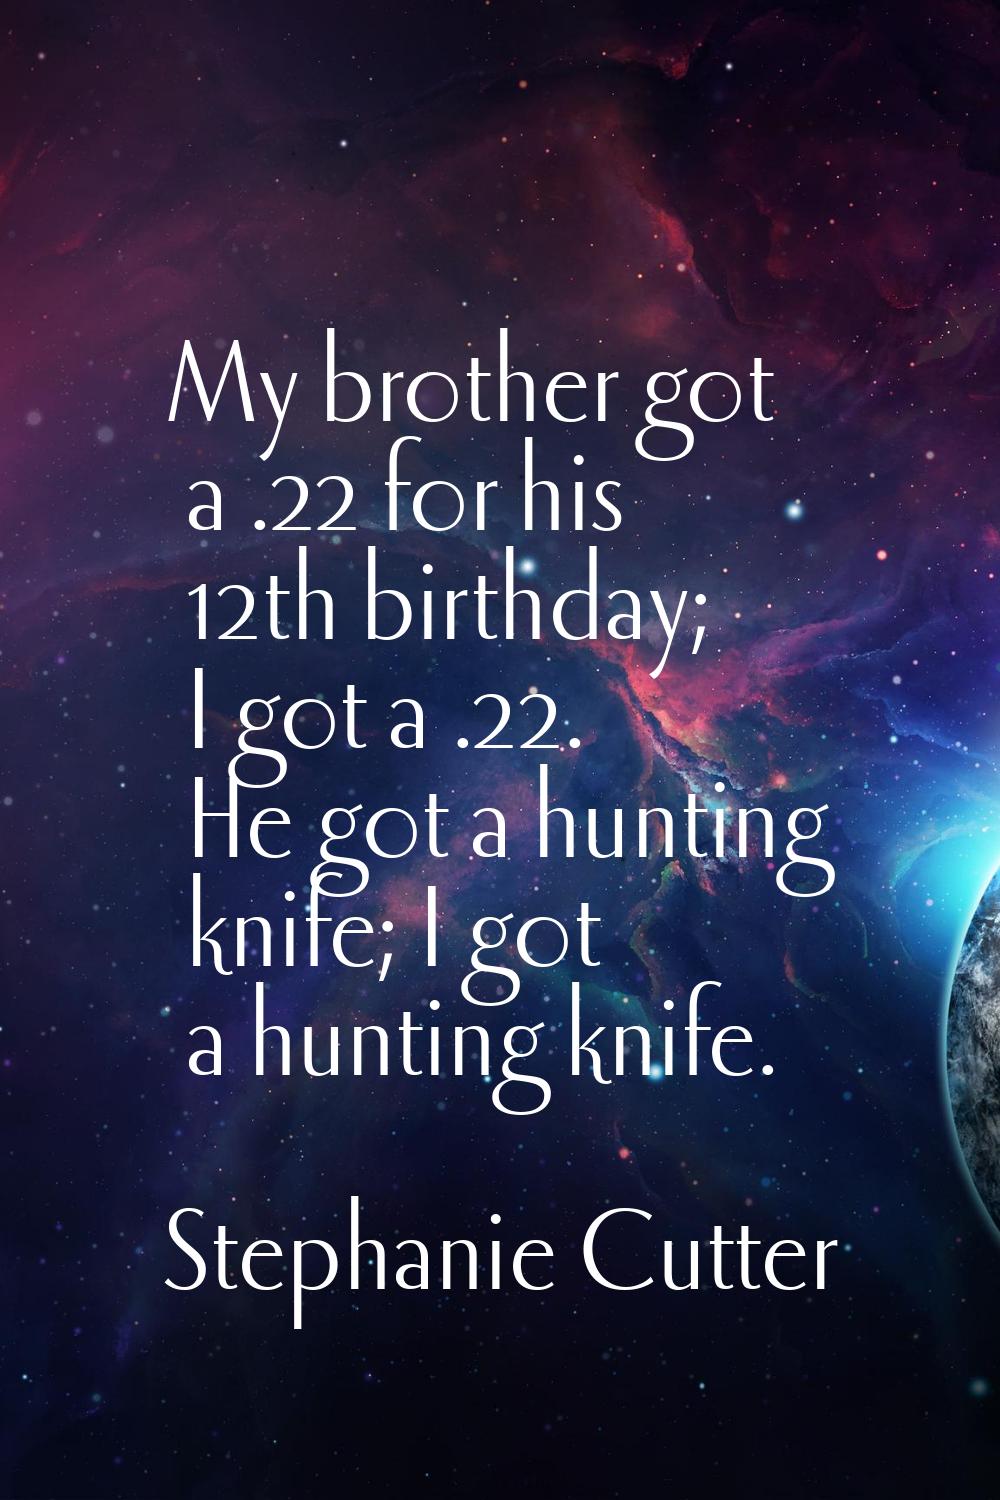 My brother got a .22 for his 12th birthday; I got a .22. He got a hunting knife; I got a hunting kn